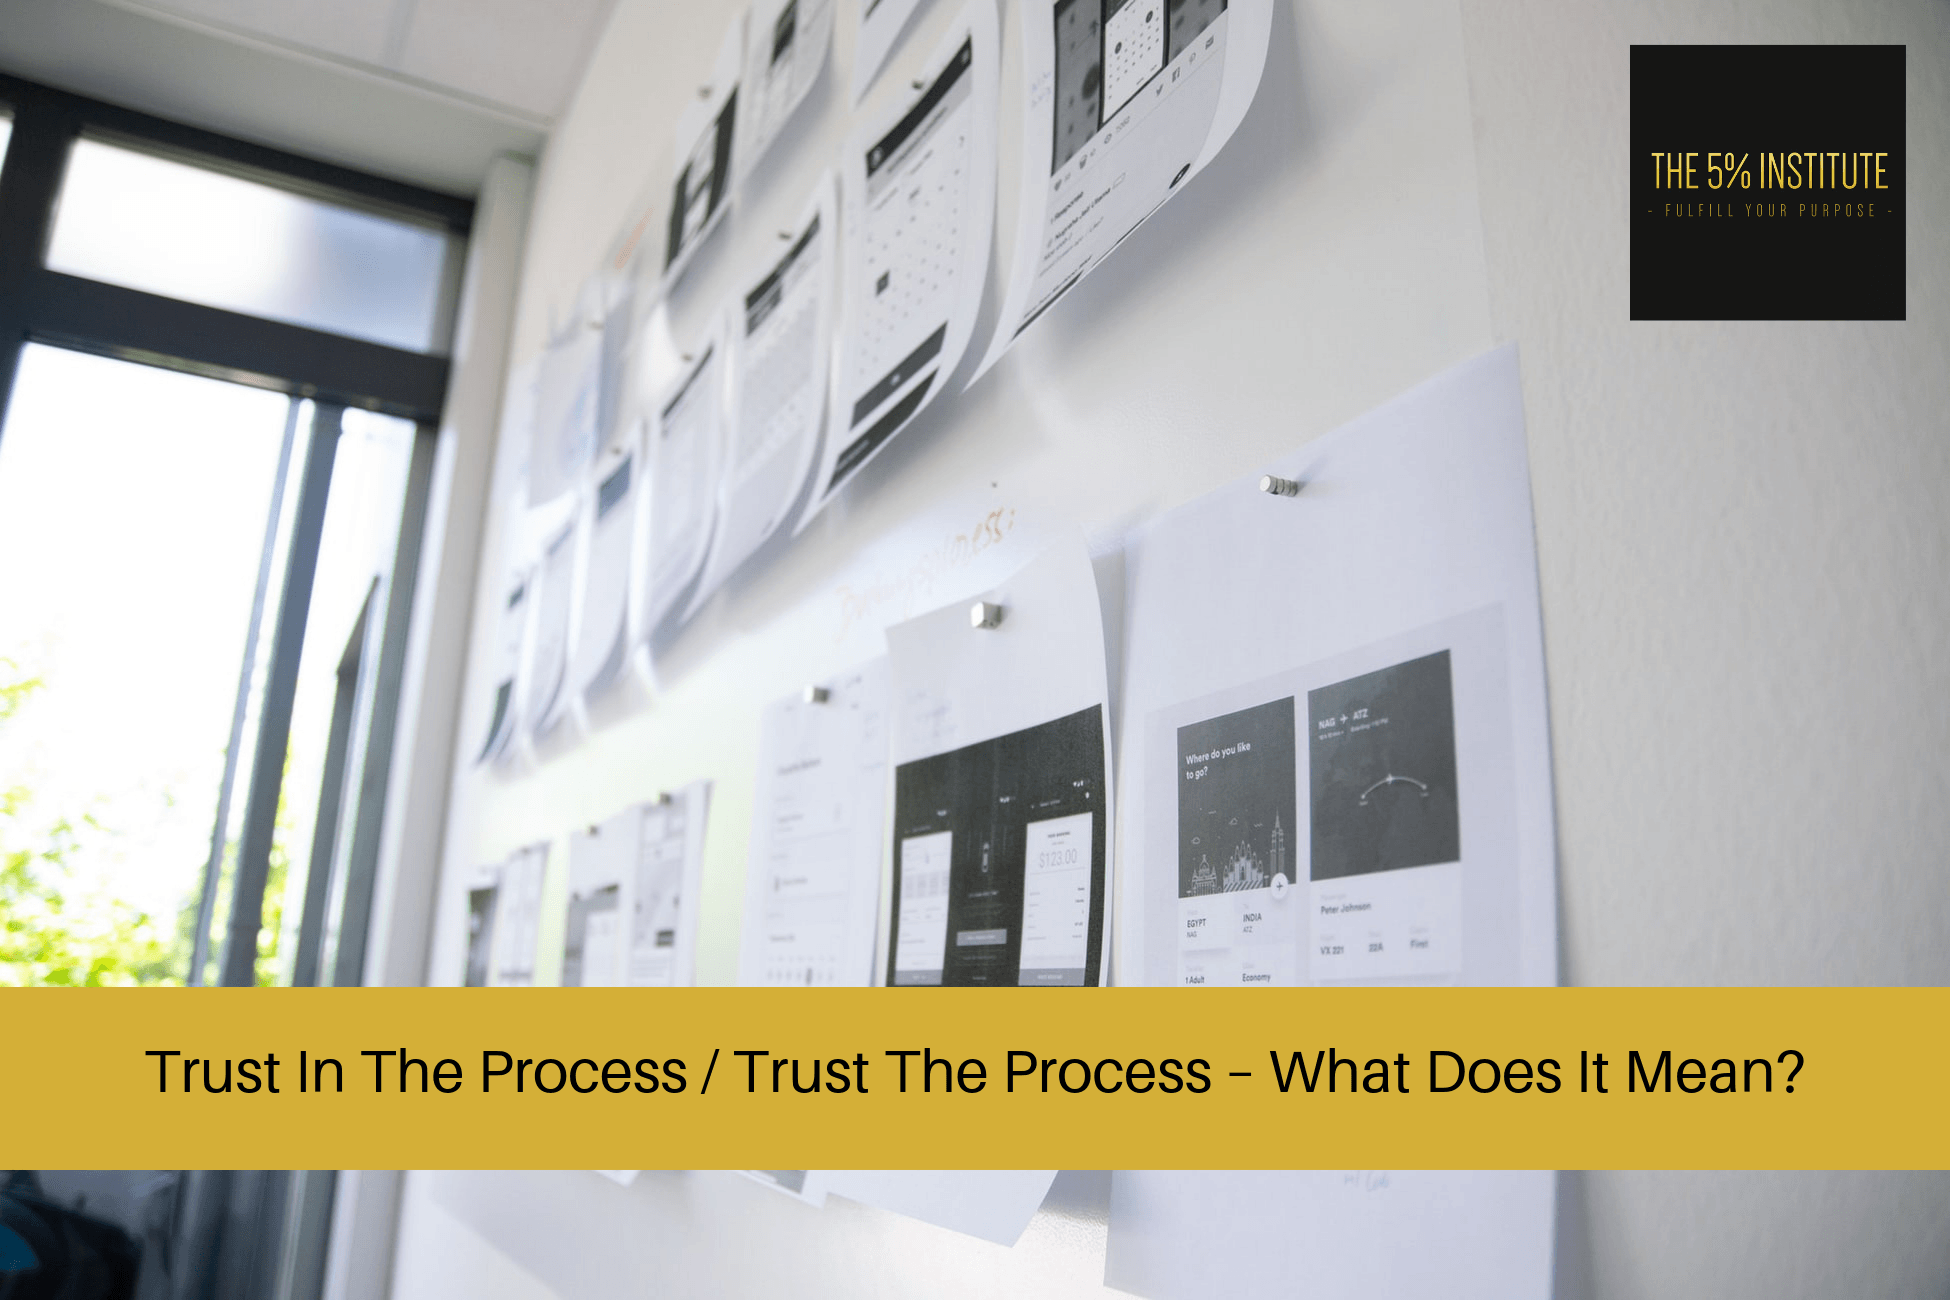 trust in the process / trust the process